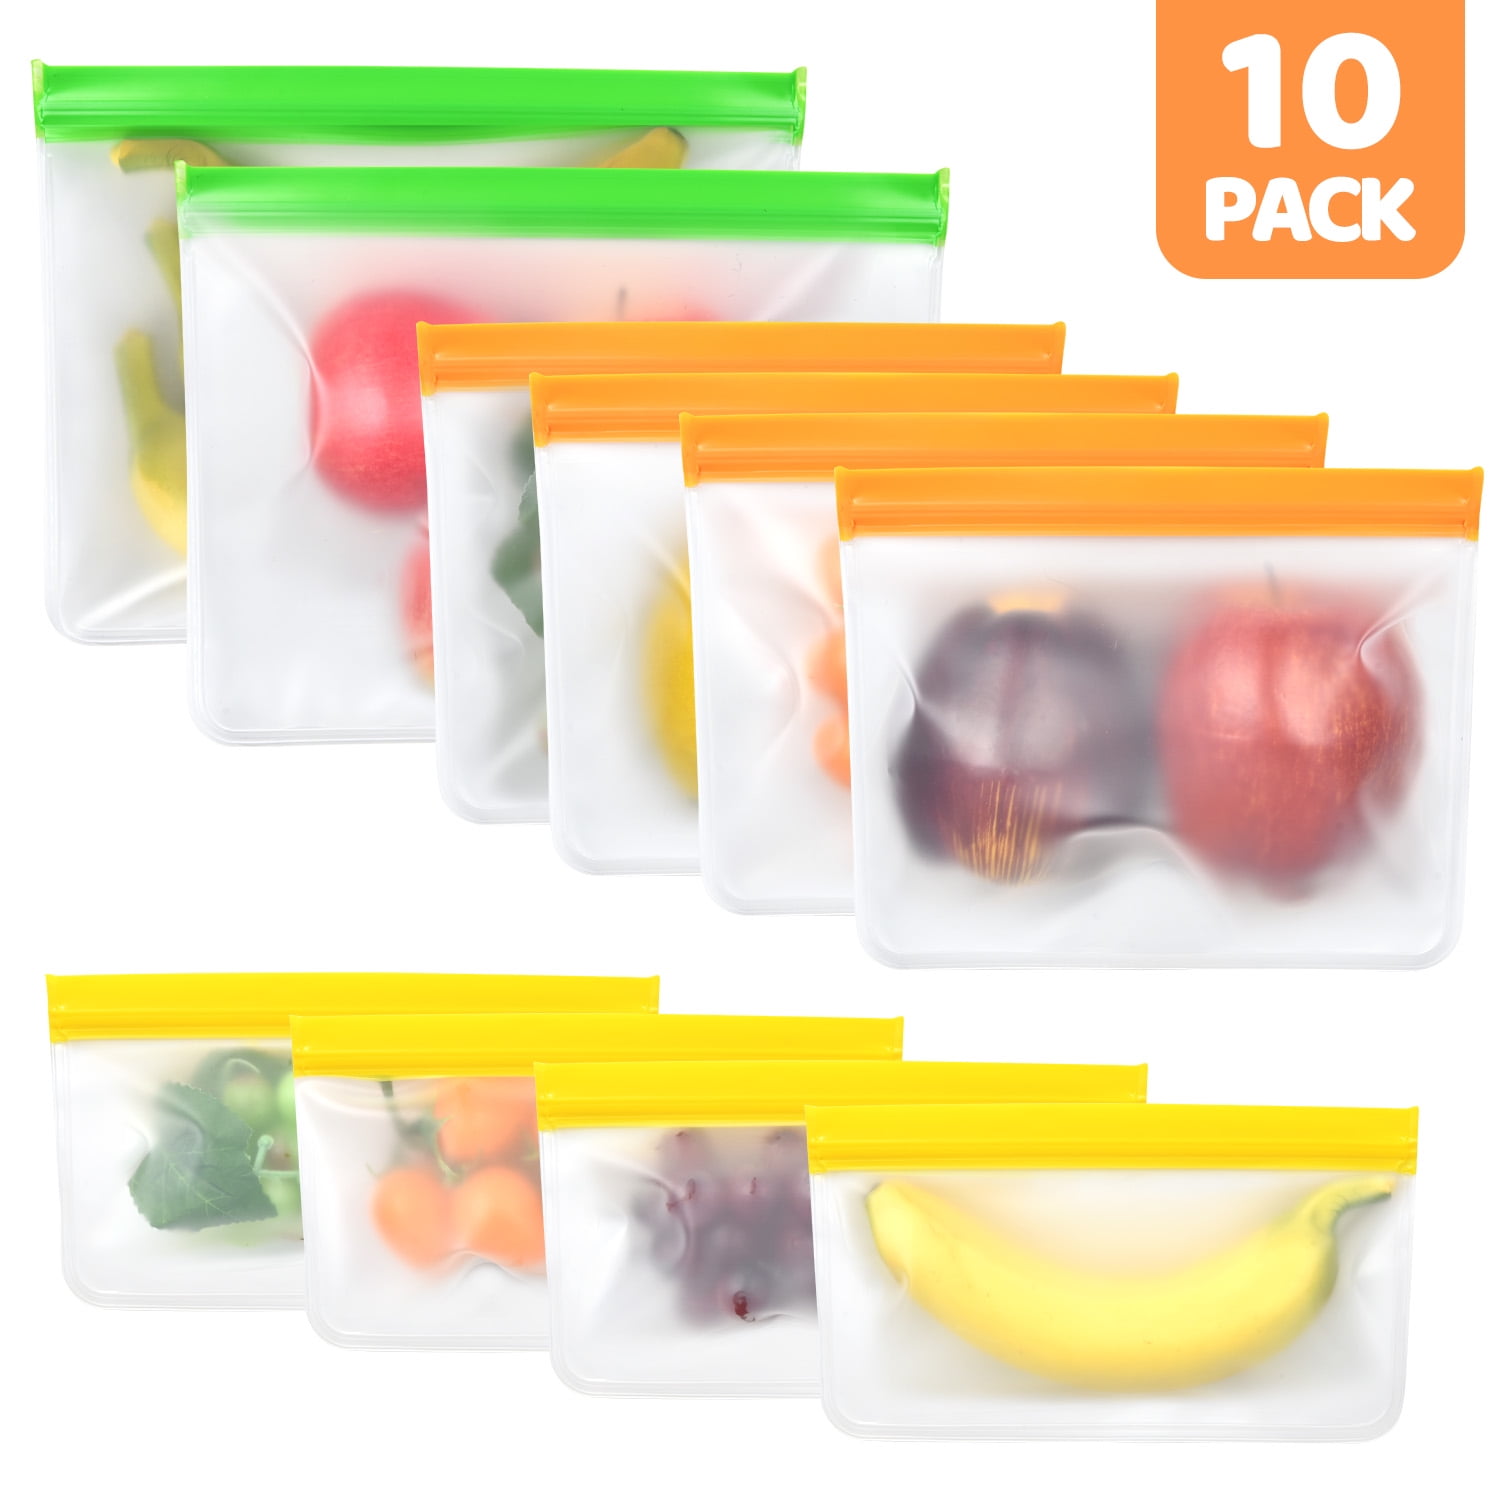 10 Pack Dishwasher Safe Reusable Food Storage Bags (5 Reusable Sandwich  Bags, 3 Reusable Snack Bags, 2 Freezer Gallon Bags), Extra Thick Leakproof